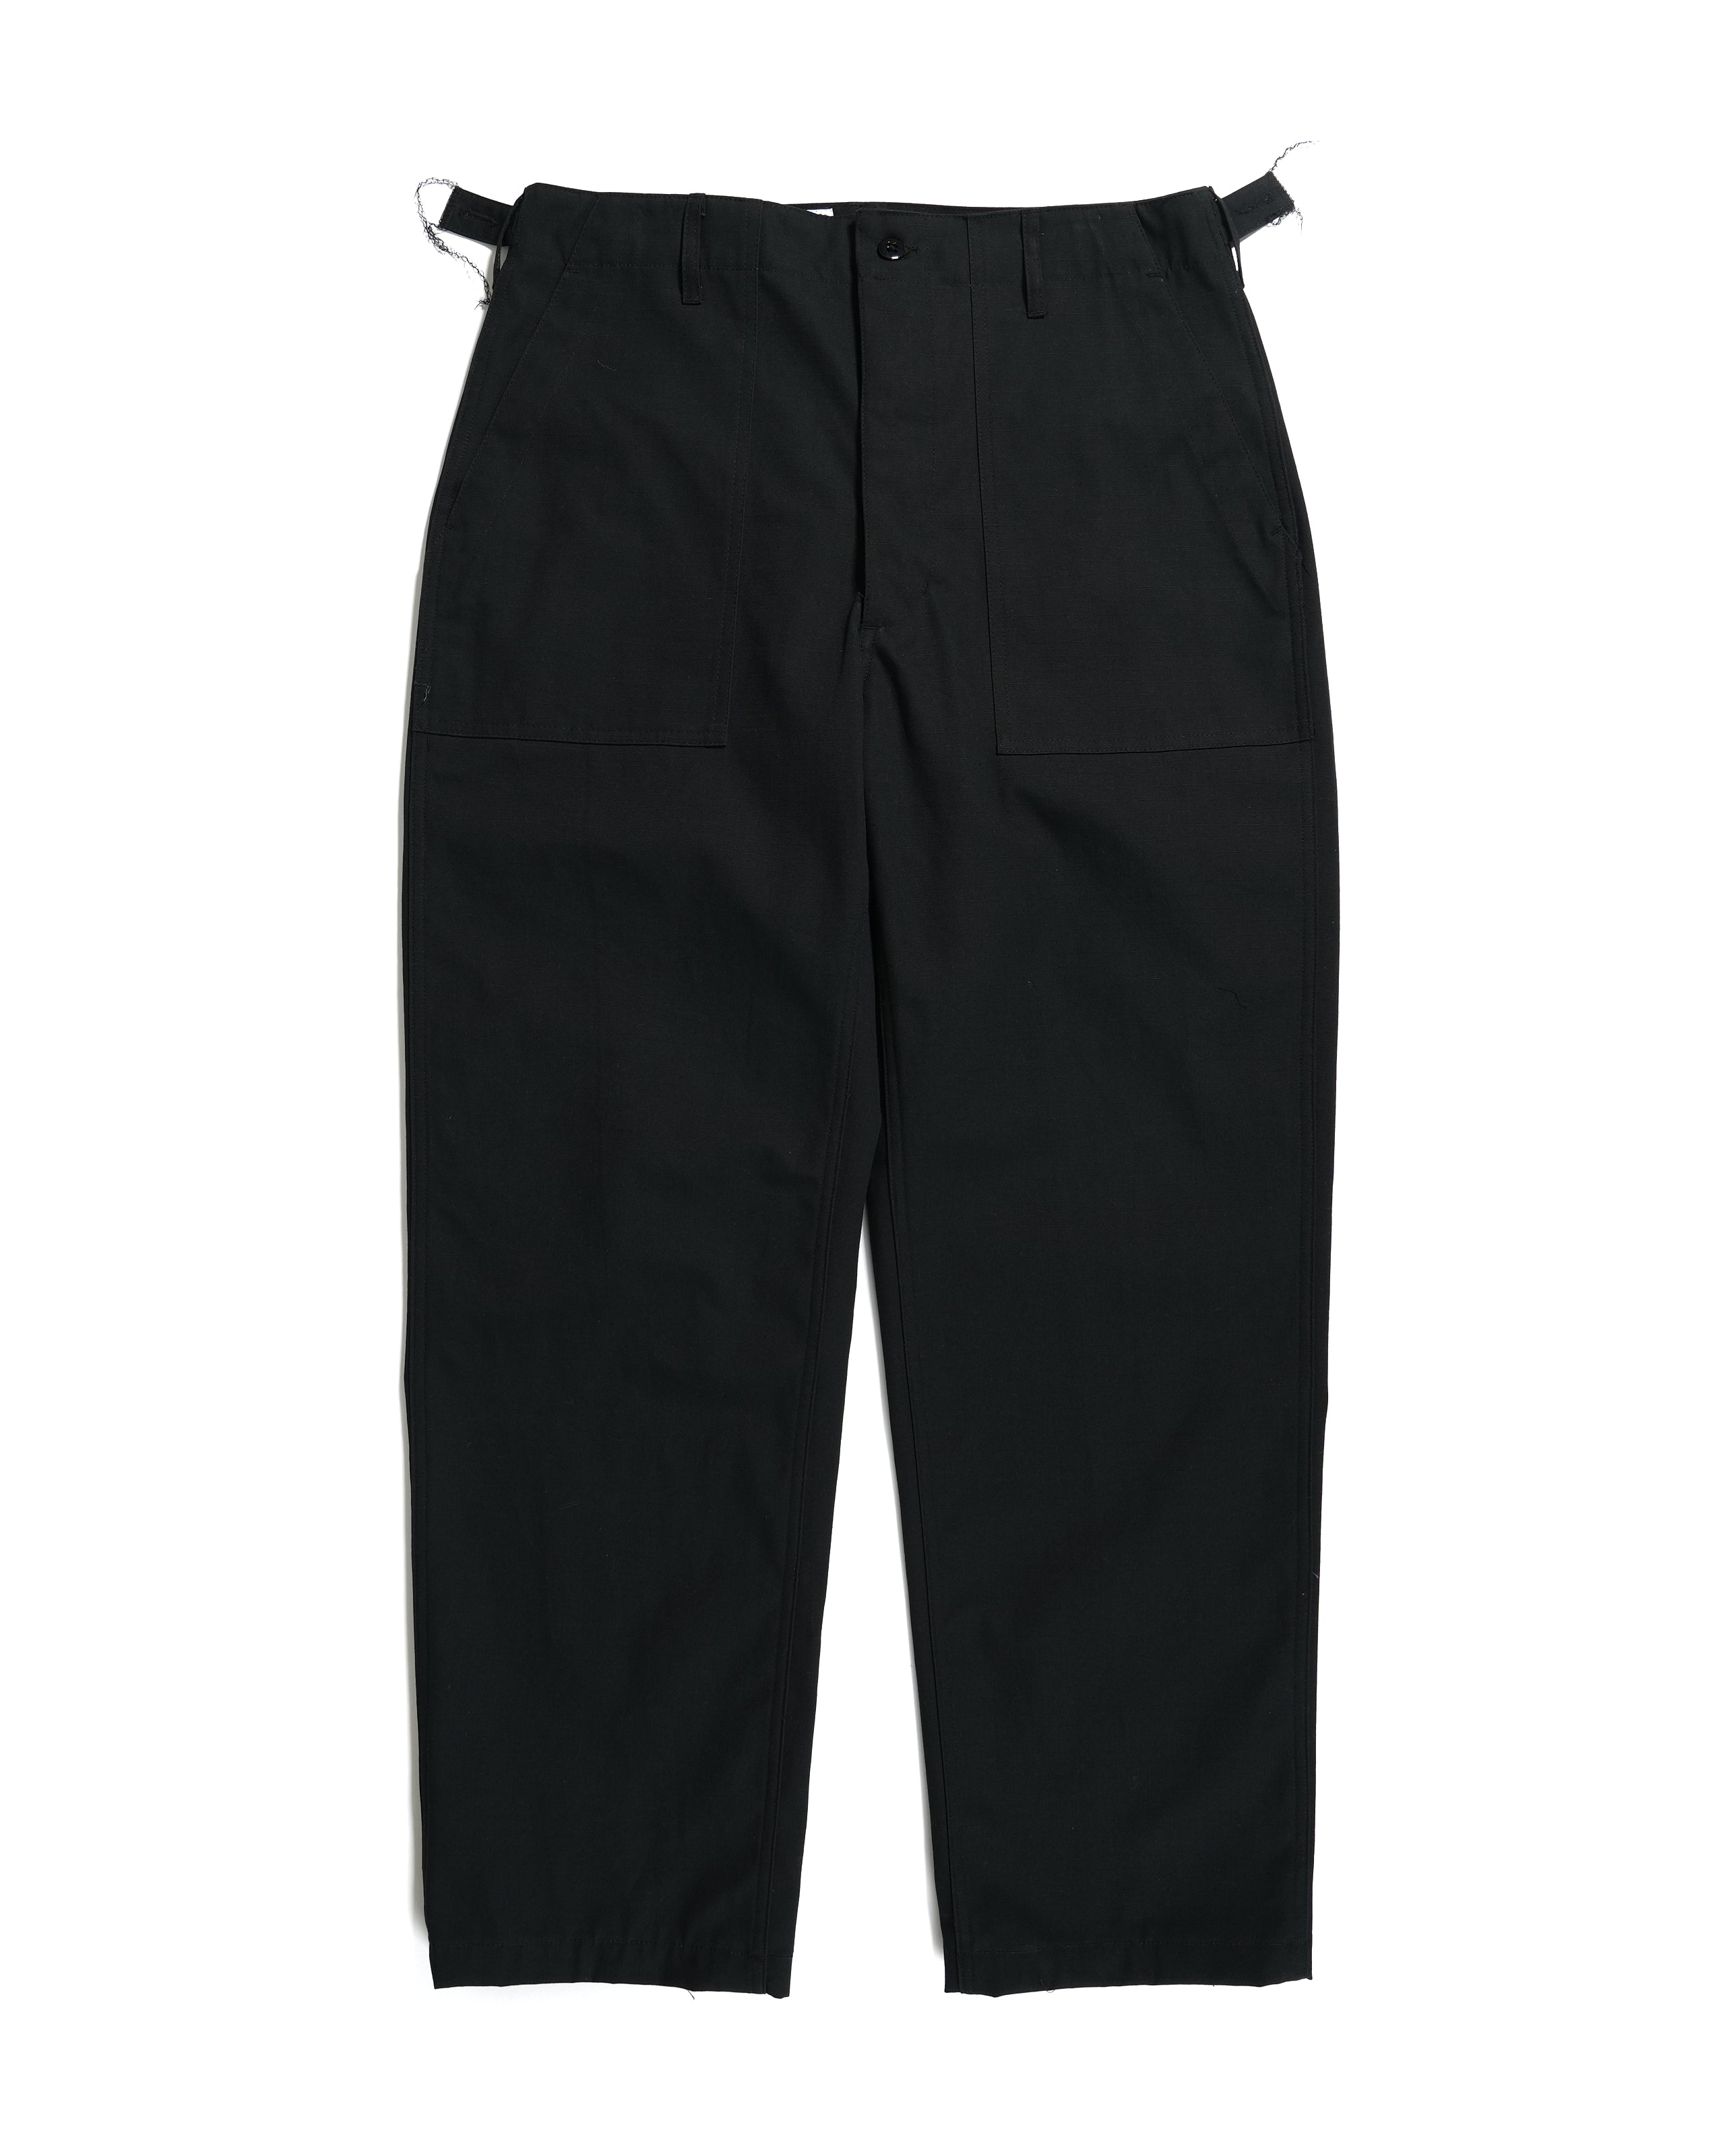 Engineered Garments Workaday Fatigue Pant Combo - Black Heavyweight Cotton Ripstop – Workaday – Nepenthes London